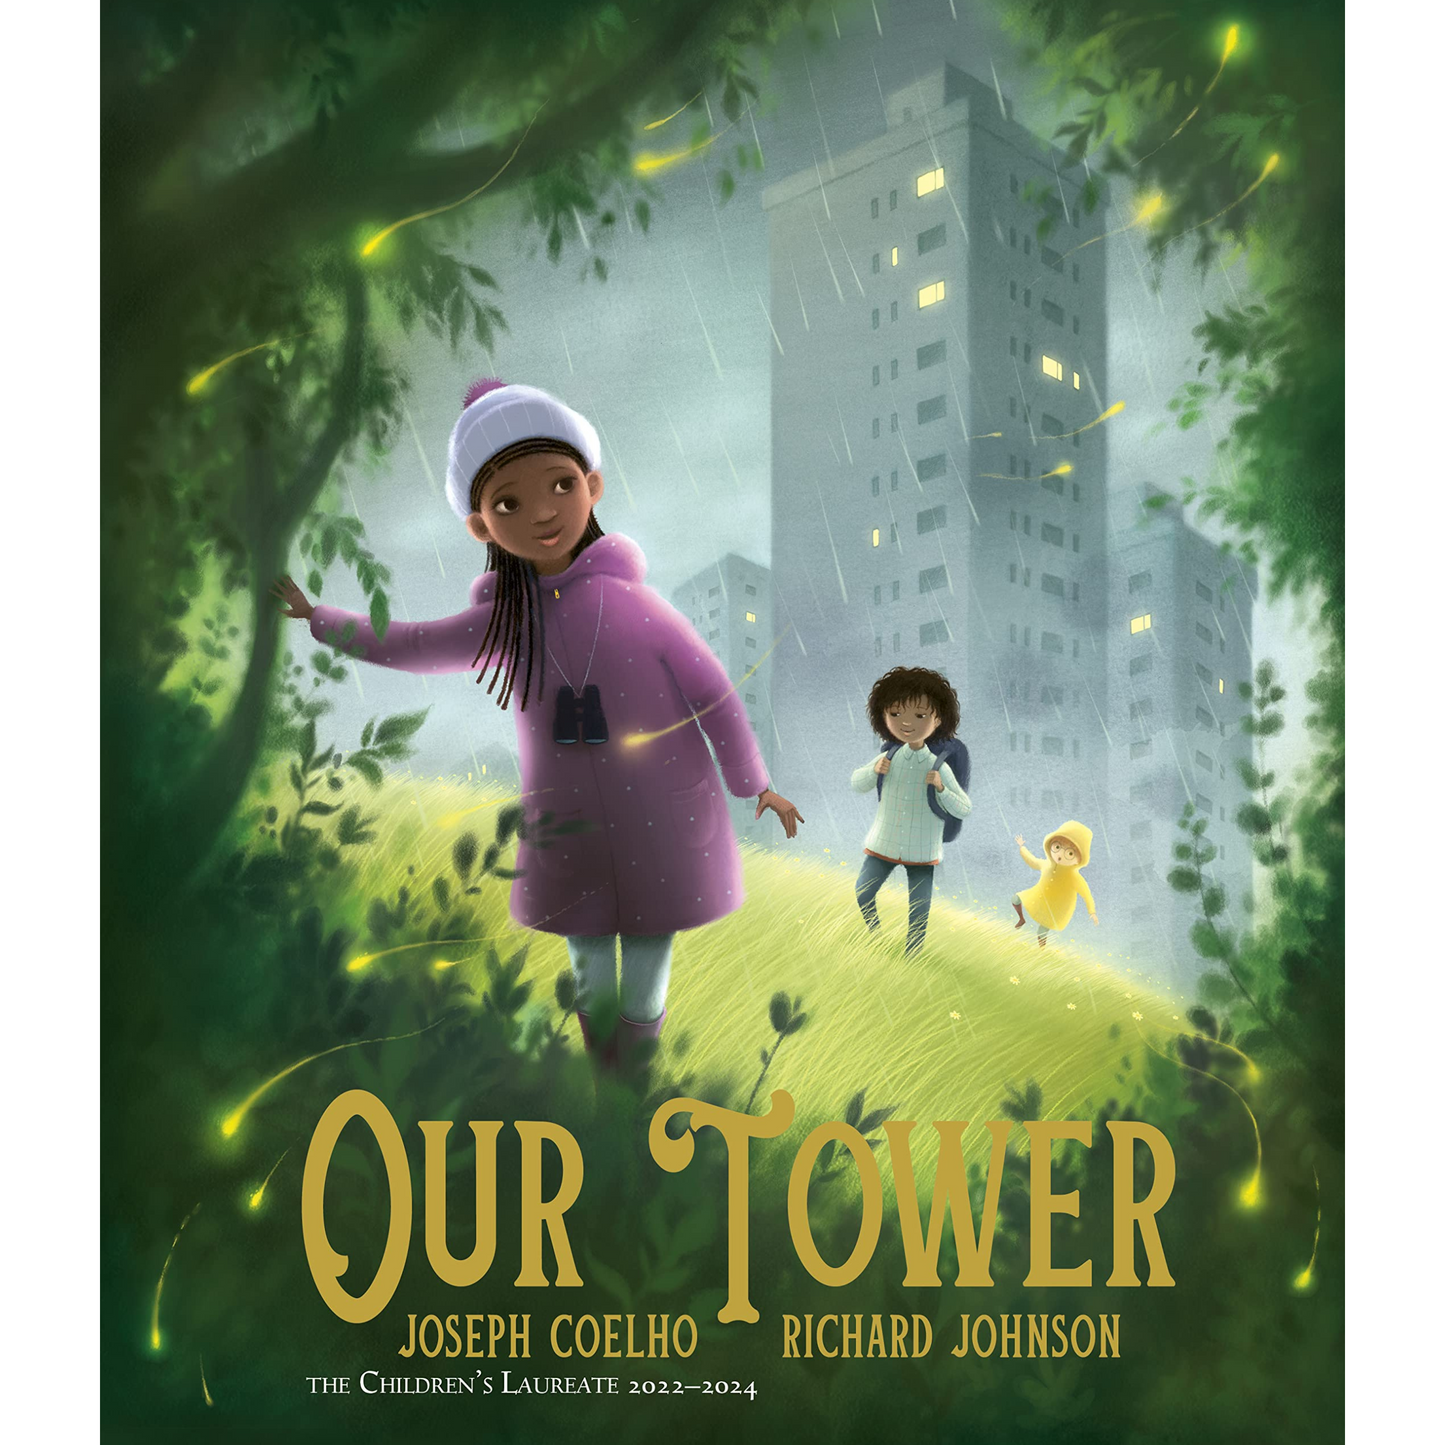 Our Tower Book Front Cover of a young girl wearing a hat and binoculars around her neck standing in the rain with tall buildings in the background.